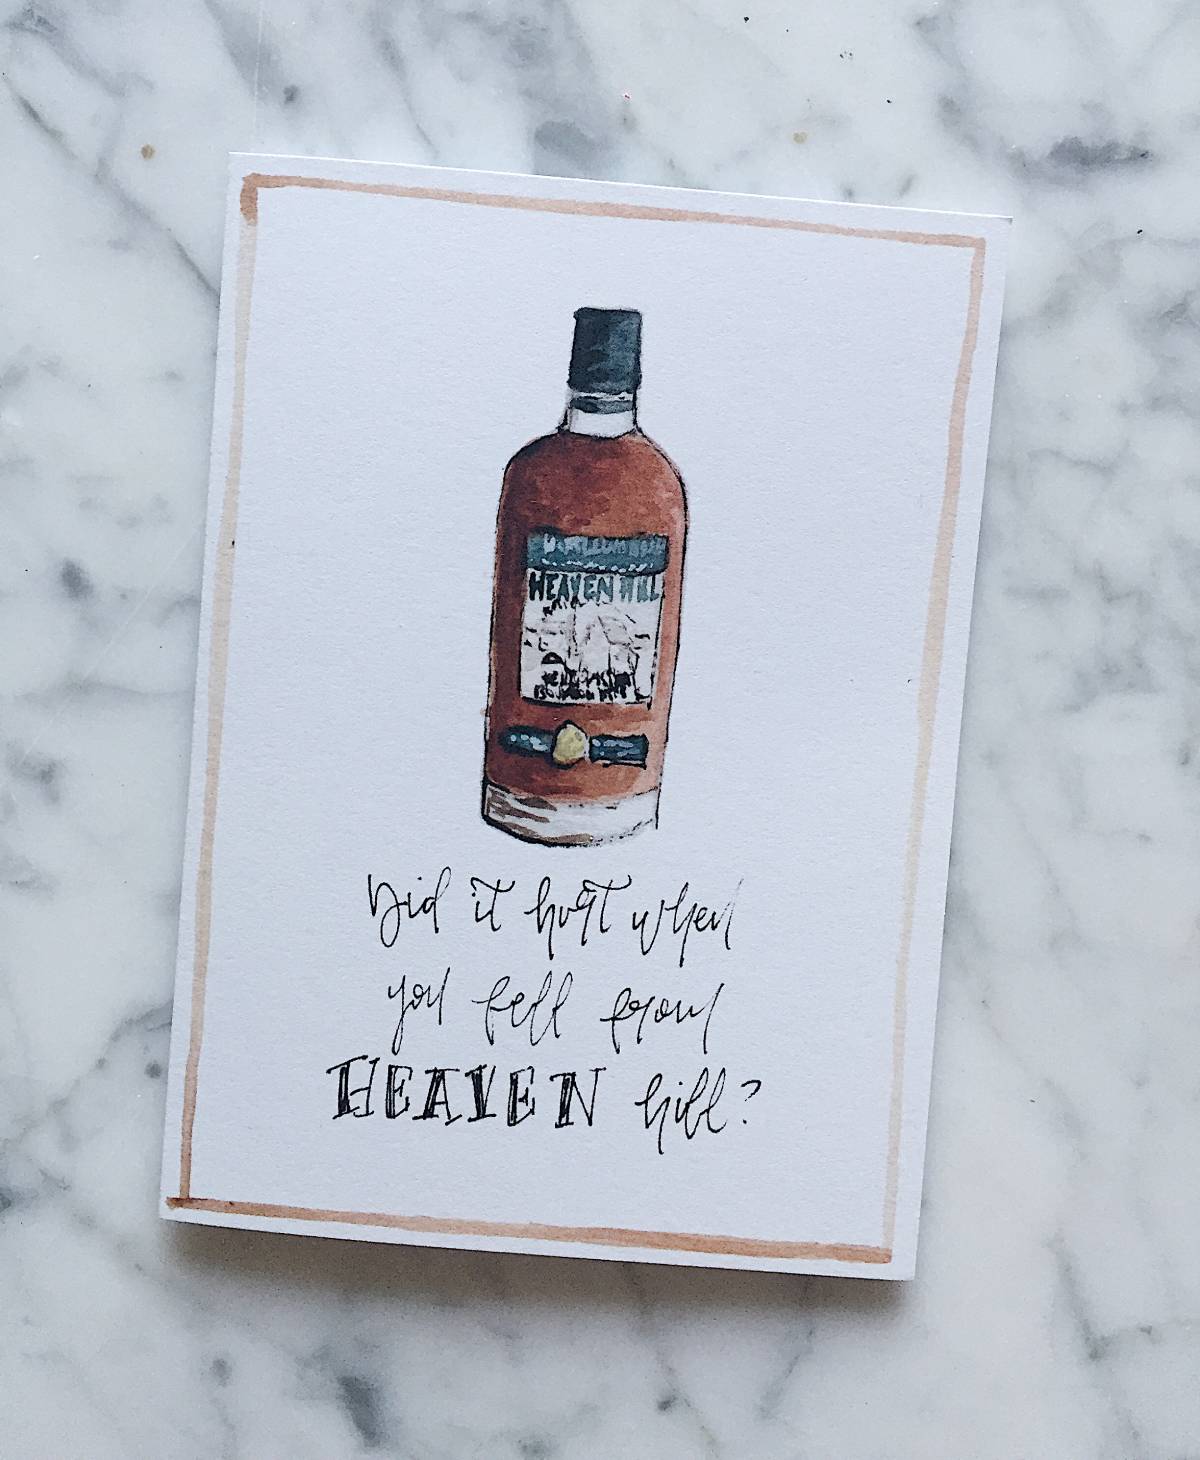 A bourbon Valentine's Day card with a bottle of Heaven Hill and the phrase "did it hurt when you fell from Heaven hill?